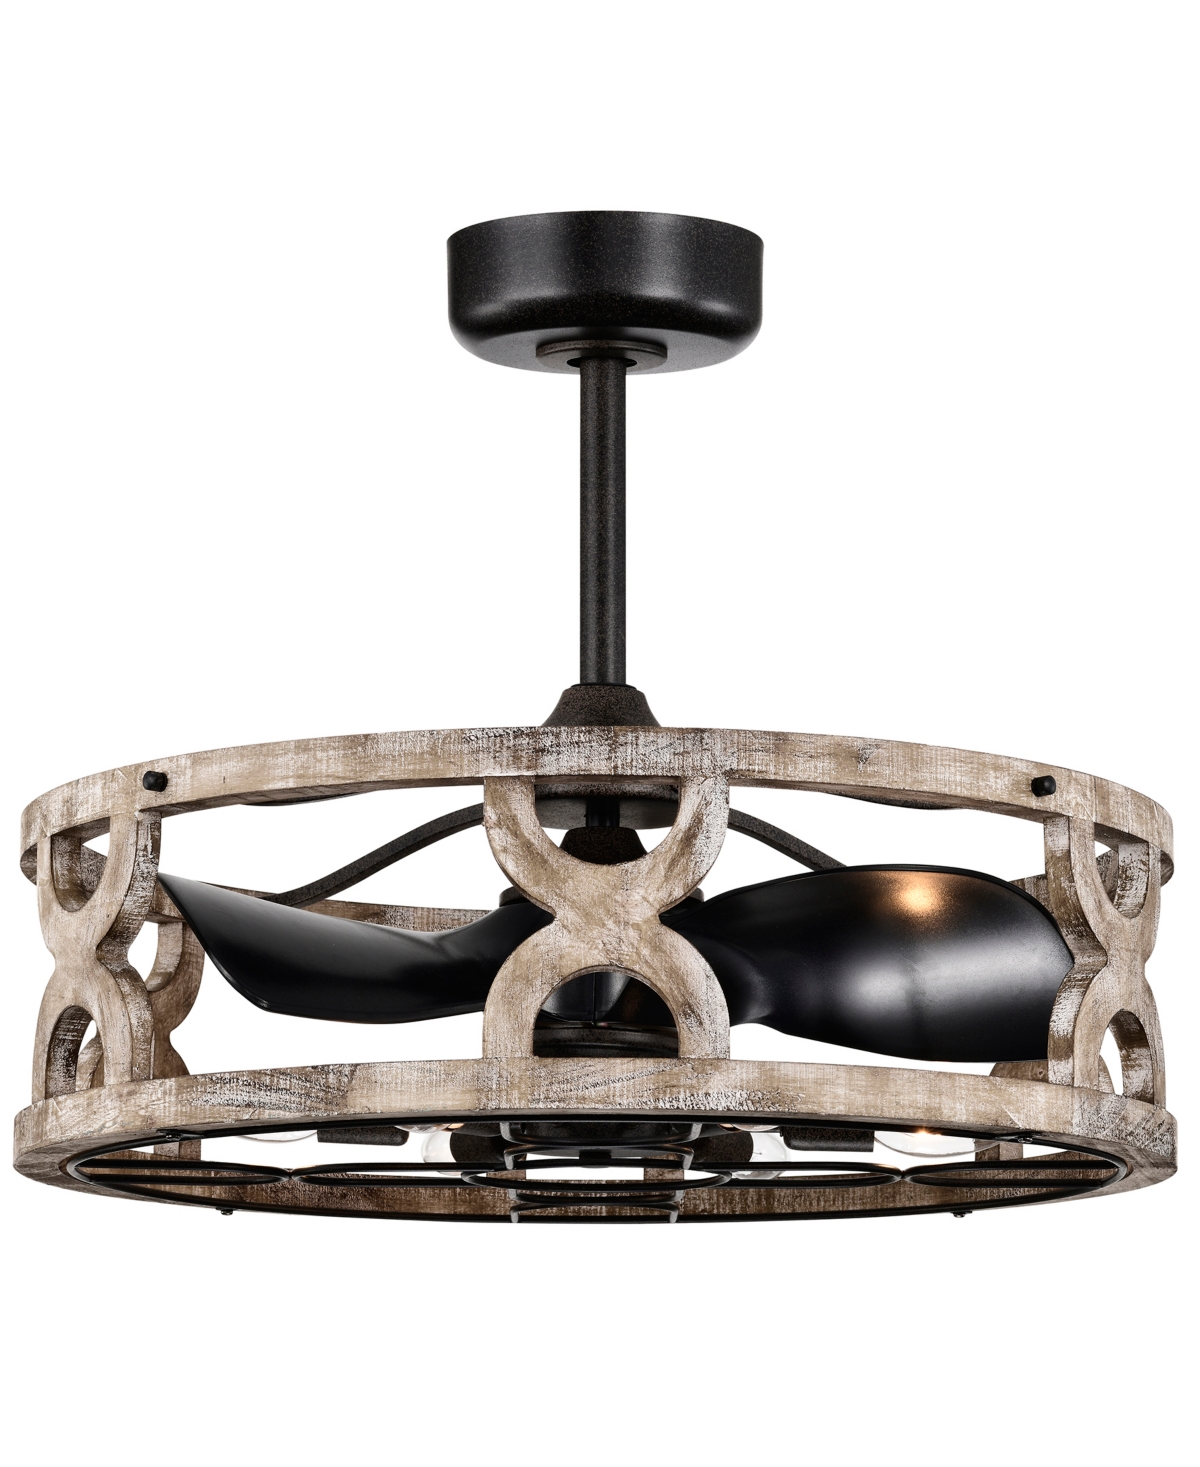 Home Accessories Kona 26" 6-light Indoor Finish Ceiling Fan With Light Kit In Matte Black And Faux Wood Grain